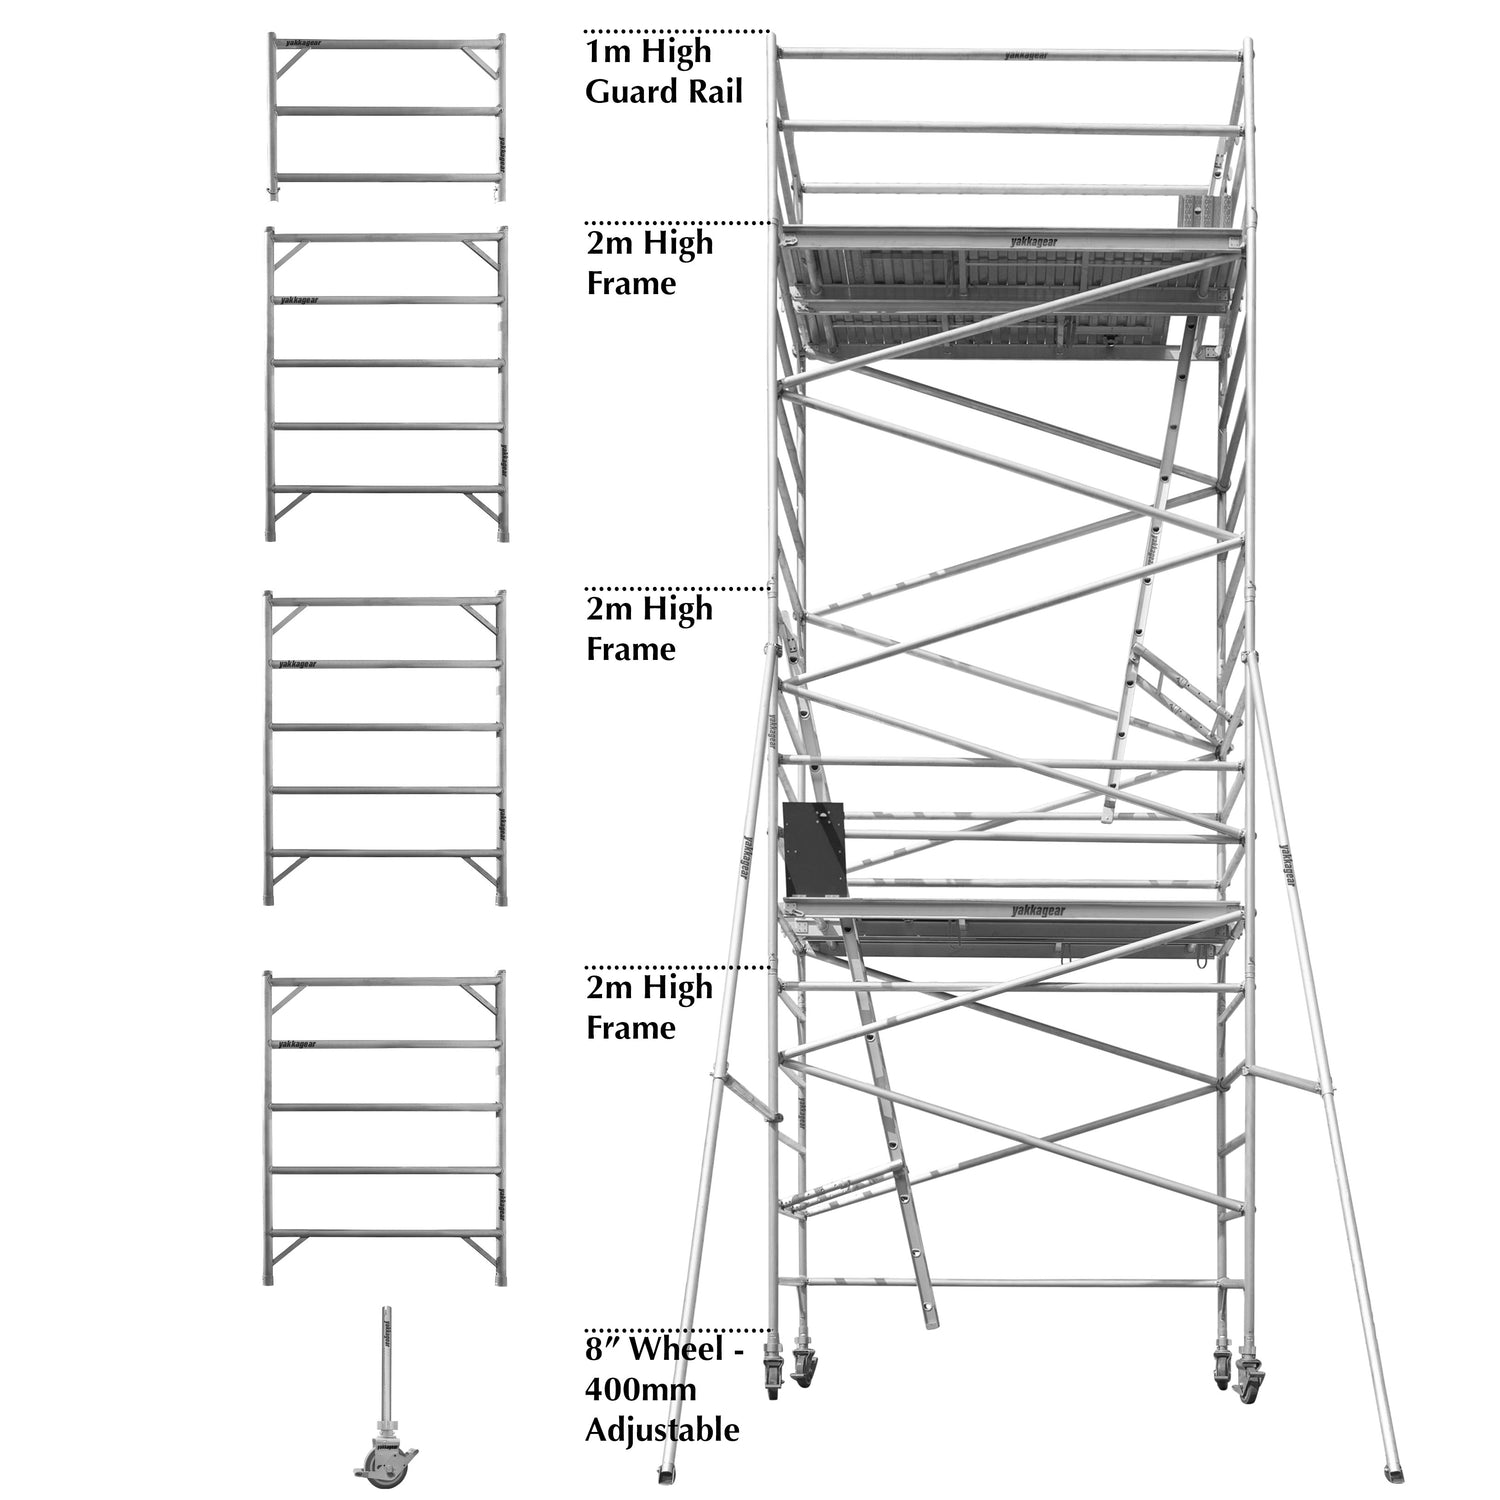 Yakka Gear Australia 2.5m Length 1.3m Wide 8.6m reach wide scaffolding tower access equipment with working height of 6.6m, view from the front angle, showing how the guard rails make the scaffolding modular and easily stored or moved, white background.